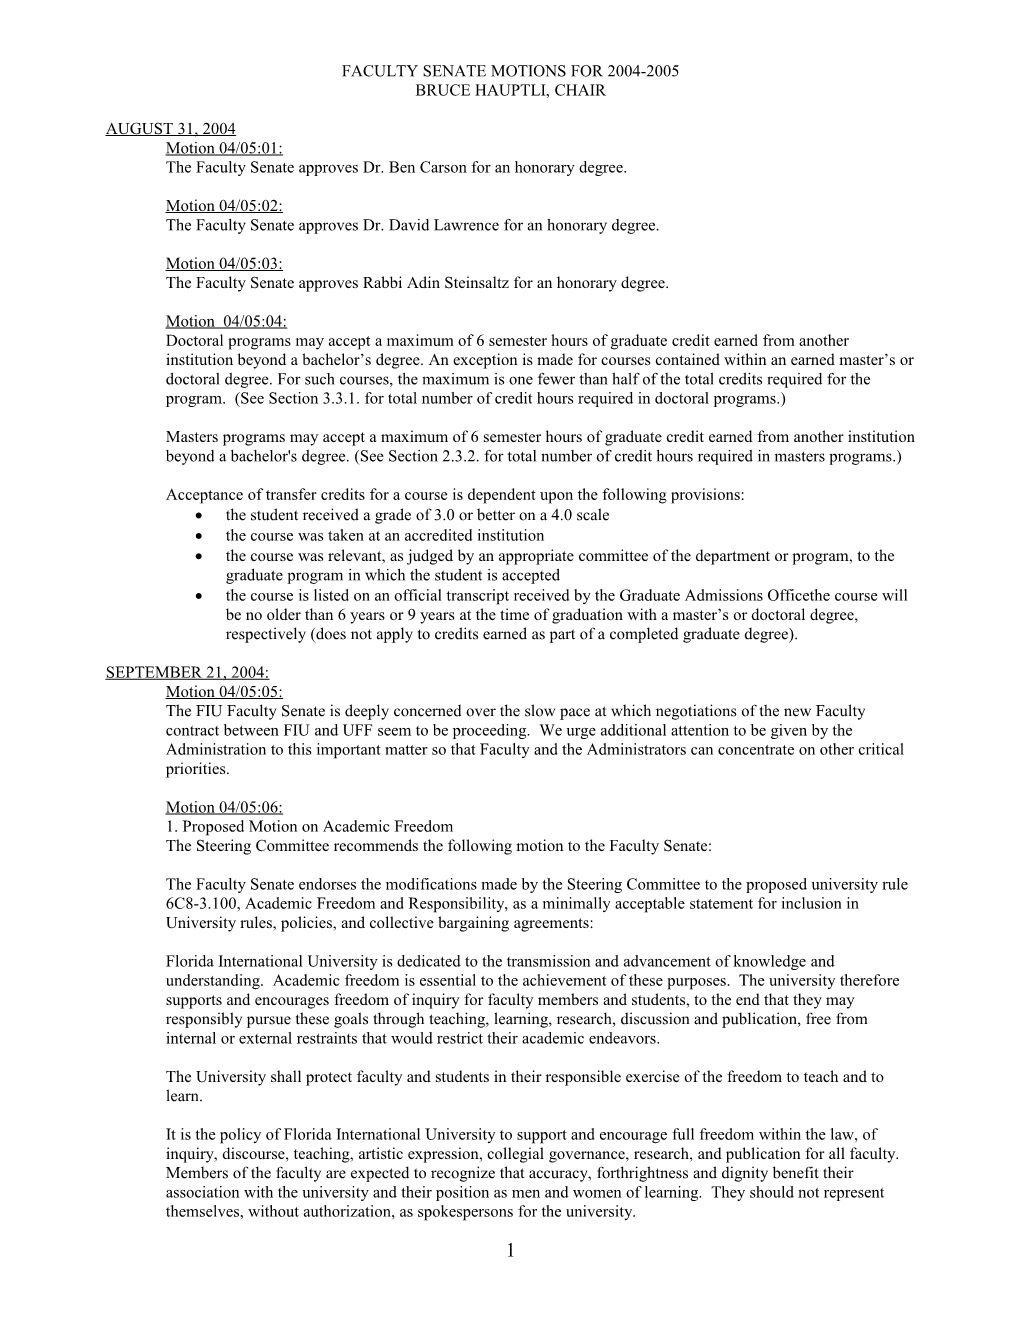 Faculty Senate Motions for 2004-2005